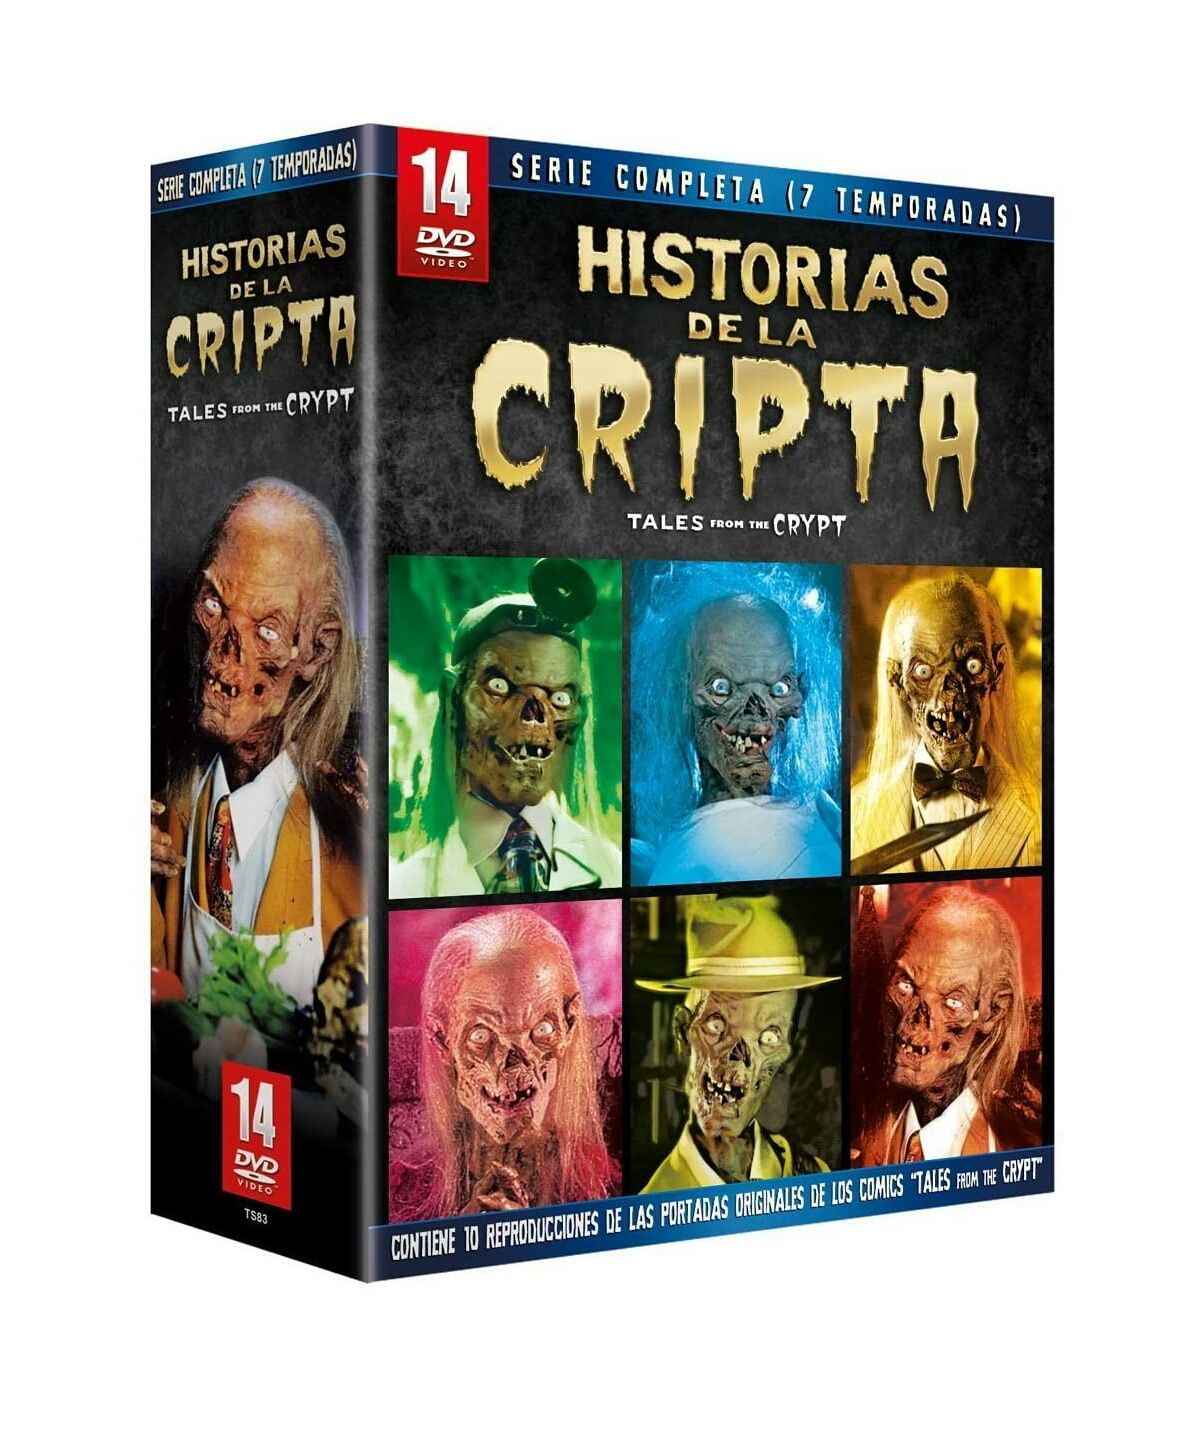 FILM Serial Tales From The Crypt DVD Complete Collection (Original)